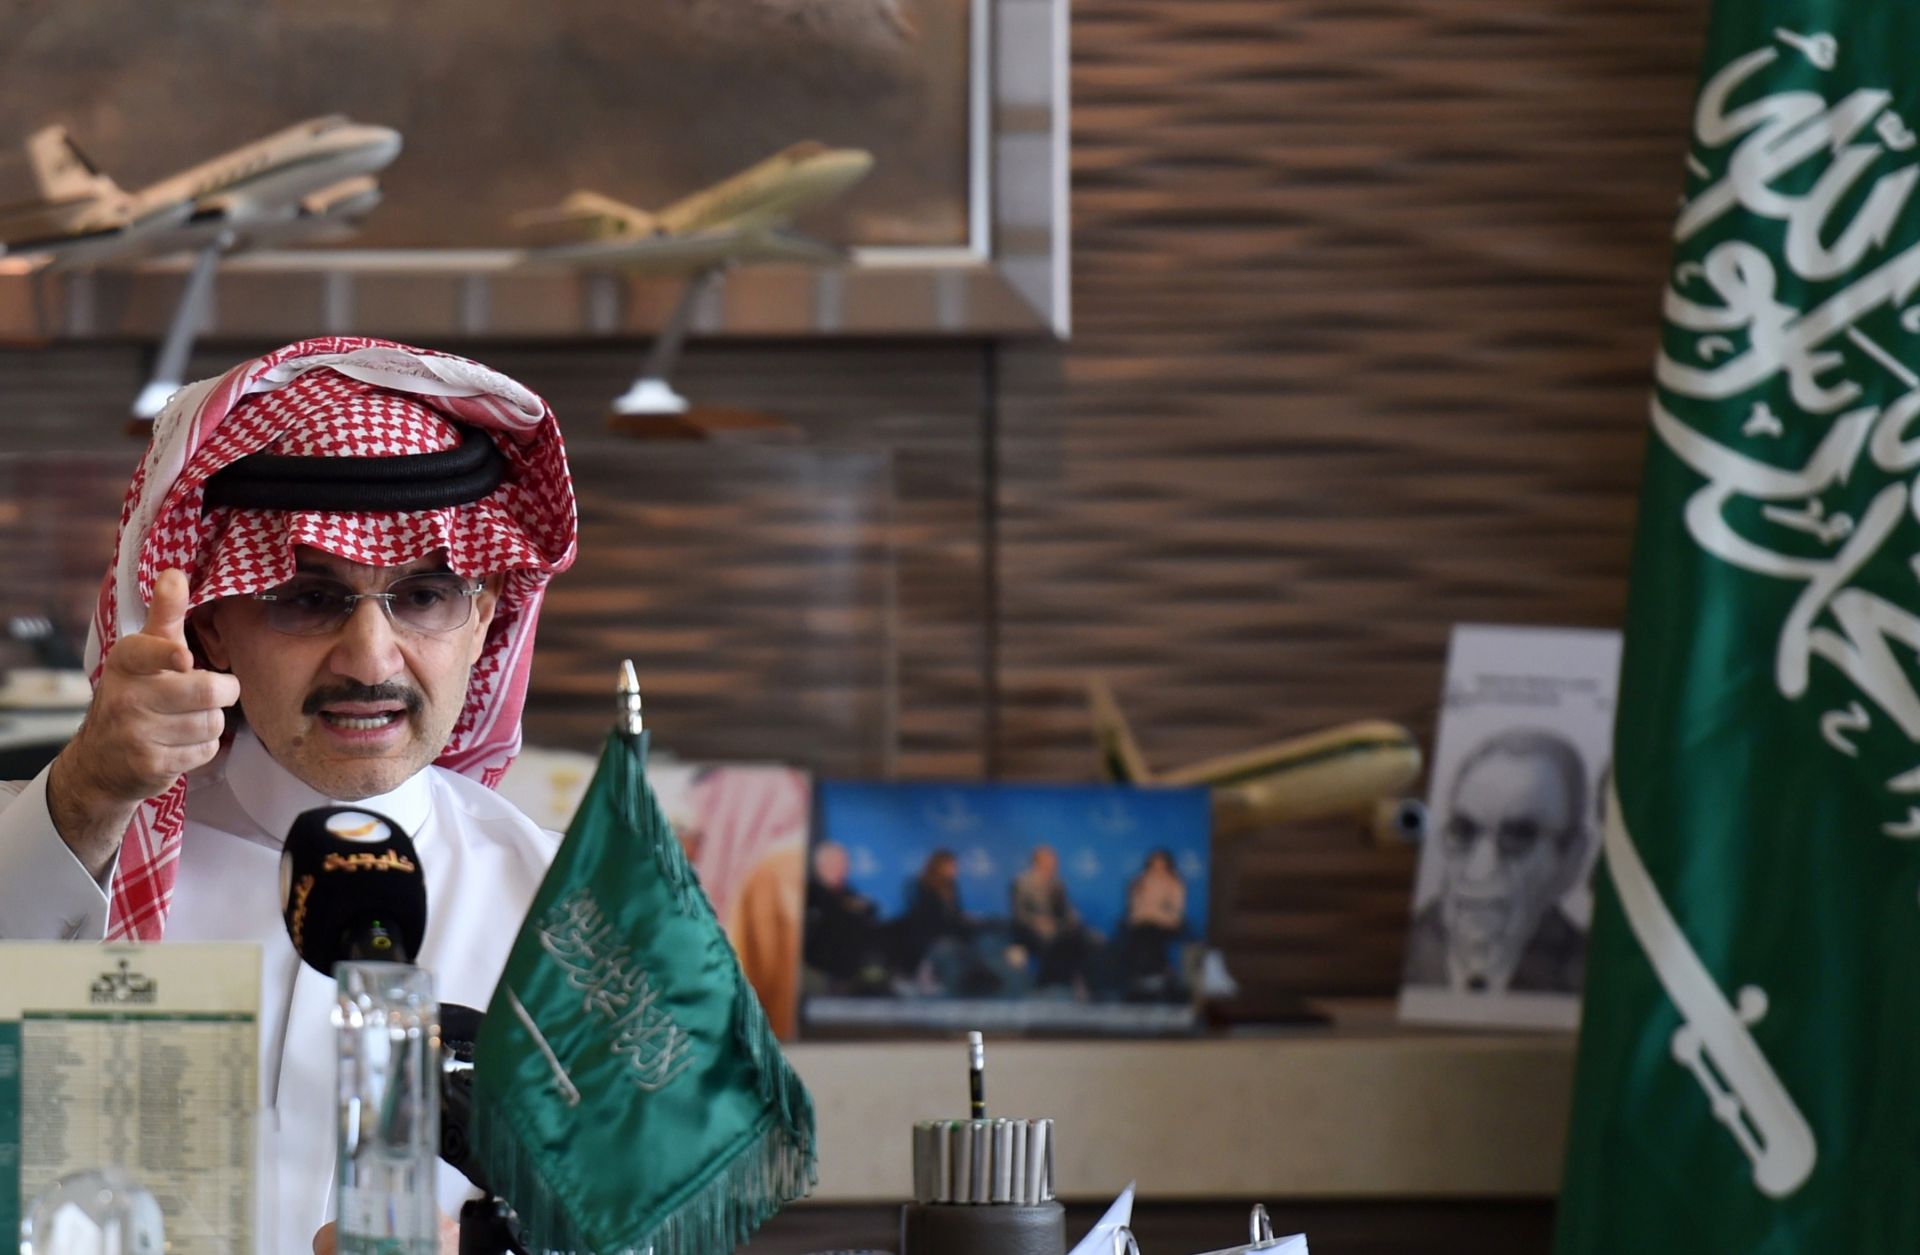 Saudi Prince Alwaleed bin Talal bin Abdulaziz al-Saud, one of the world's wealthiest entrepreneurs and the head of Alwaleed Philanthropies, is among dozens of members of the kingdom's business and political elite accused of corruption.